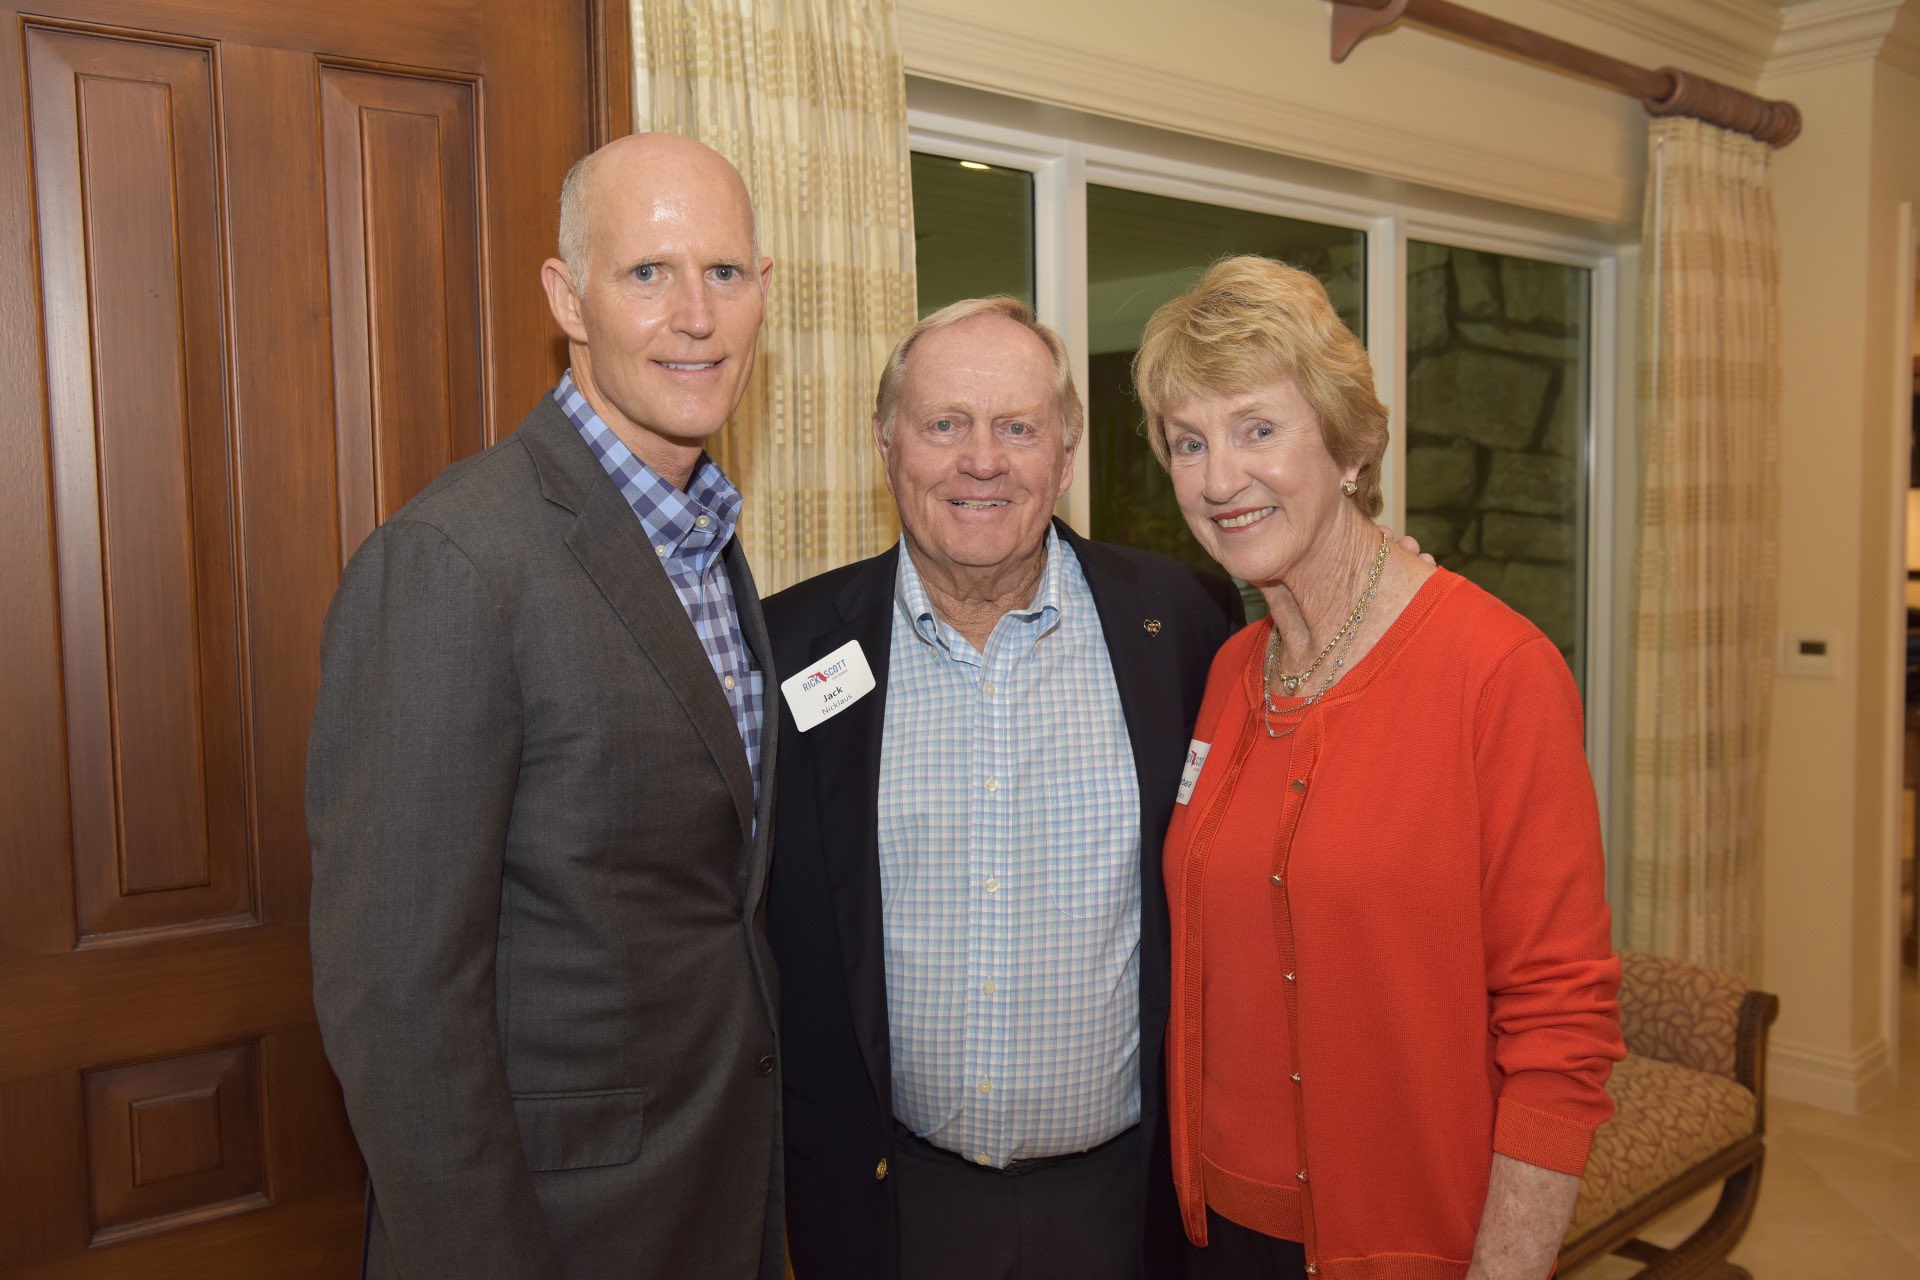 Happy birthday to my friend, and the Golden Bear, Jack Nicklaus! 